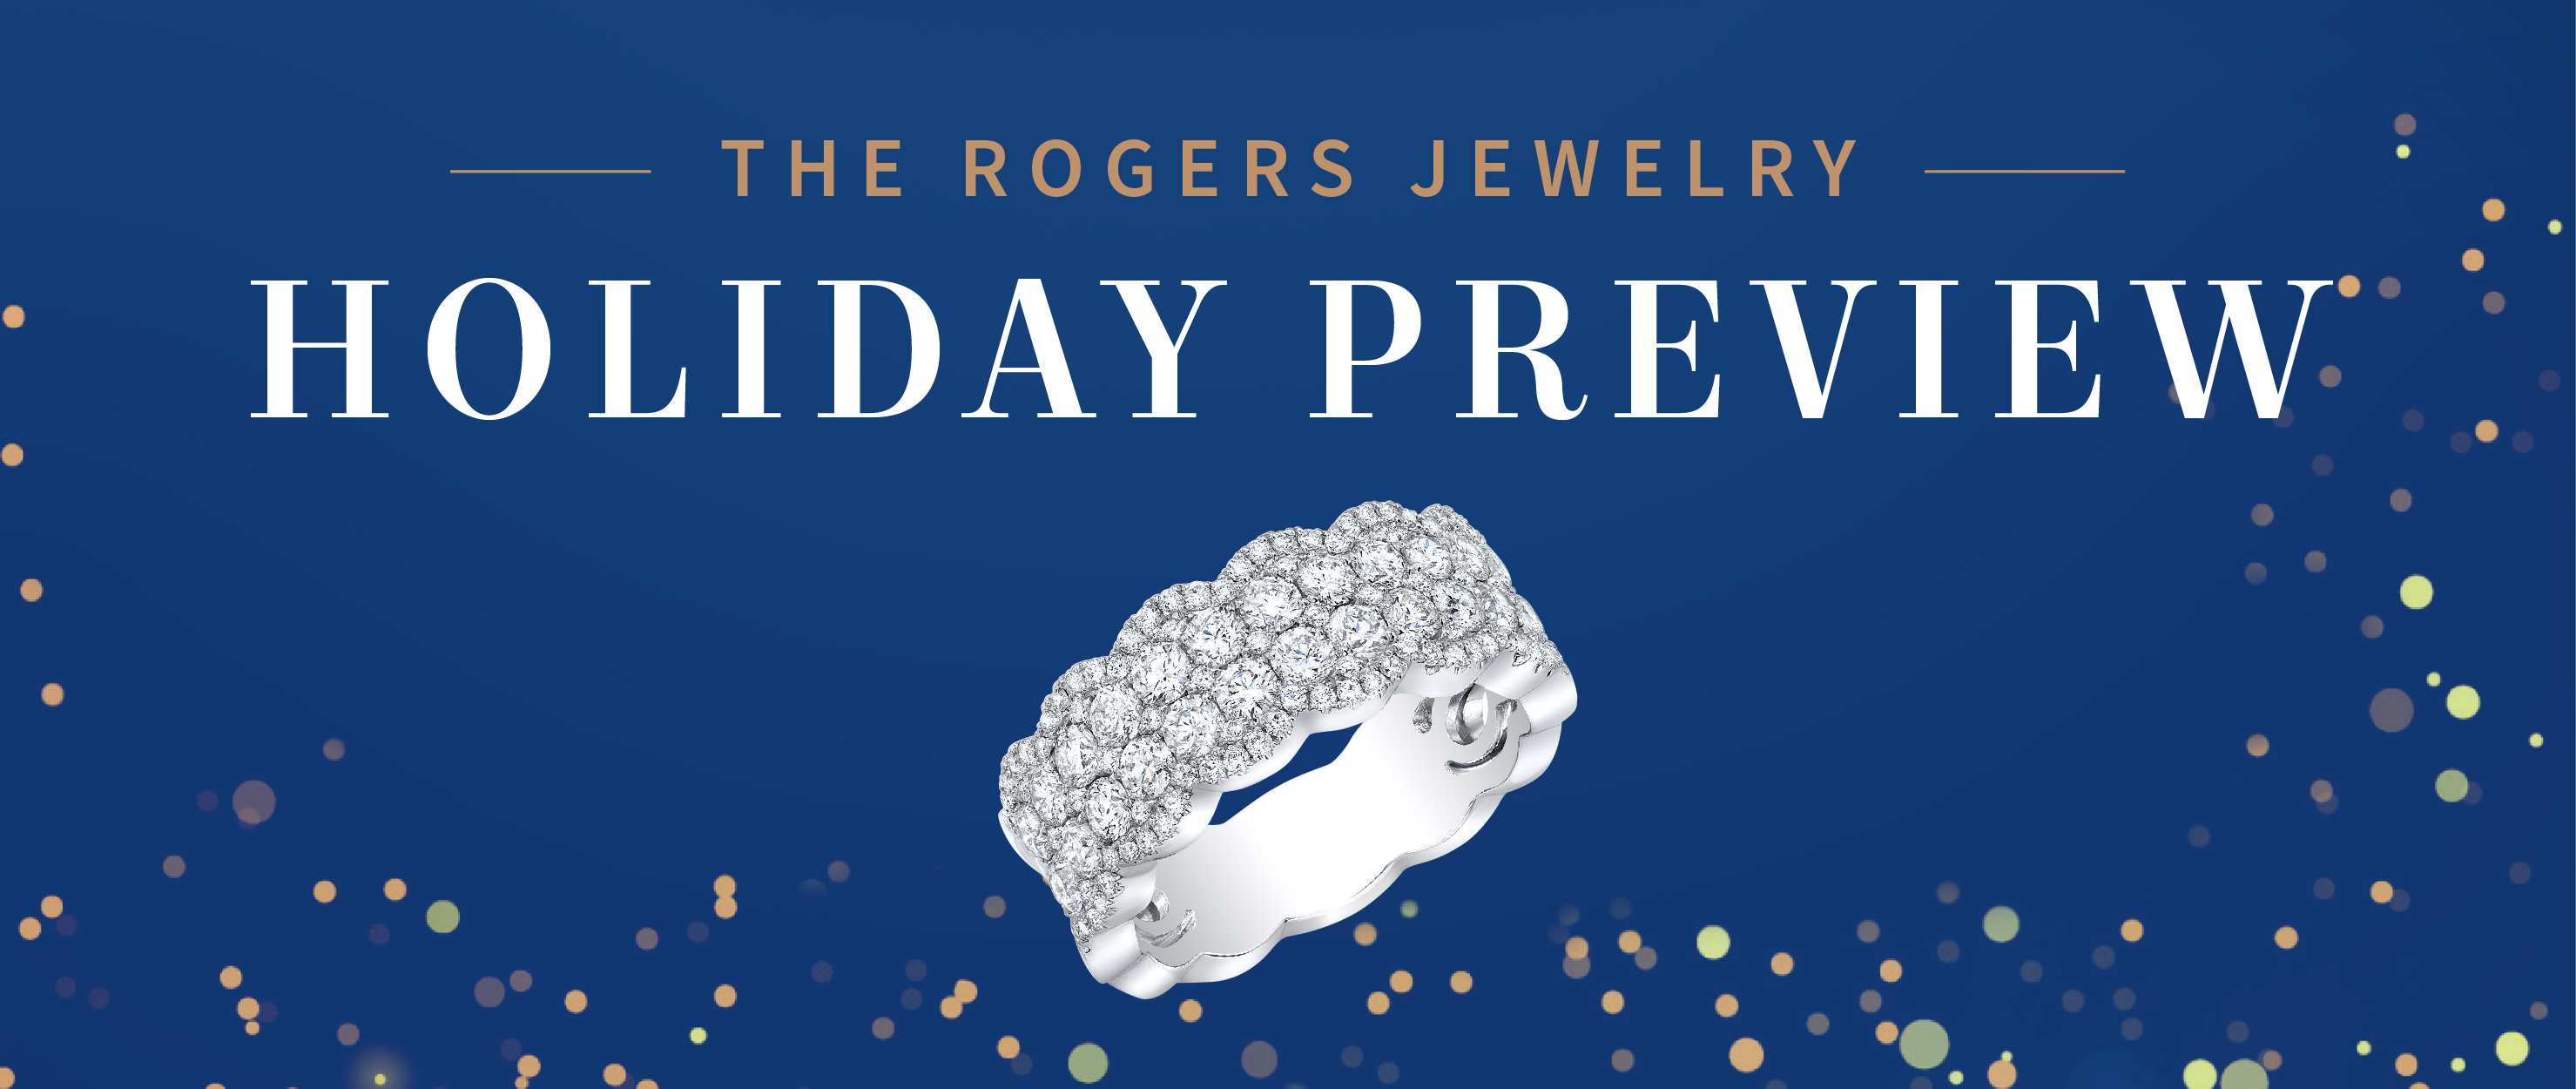 Rogers Jewelry Holiday Preview